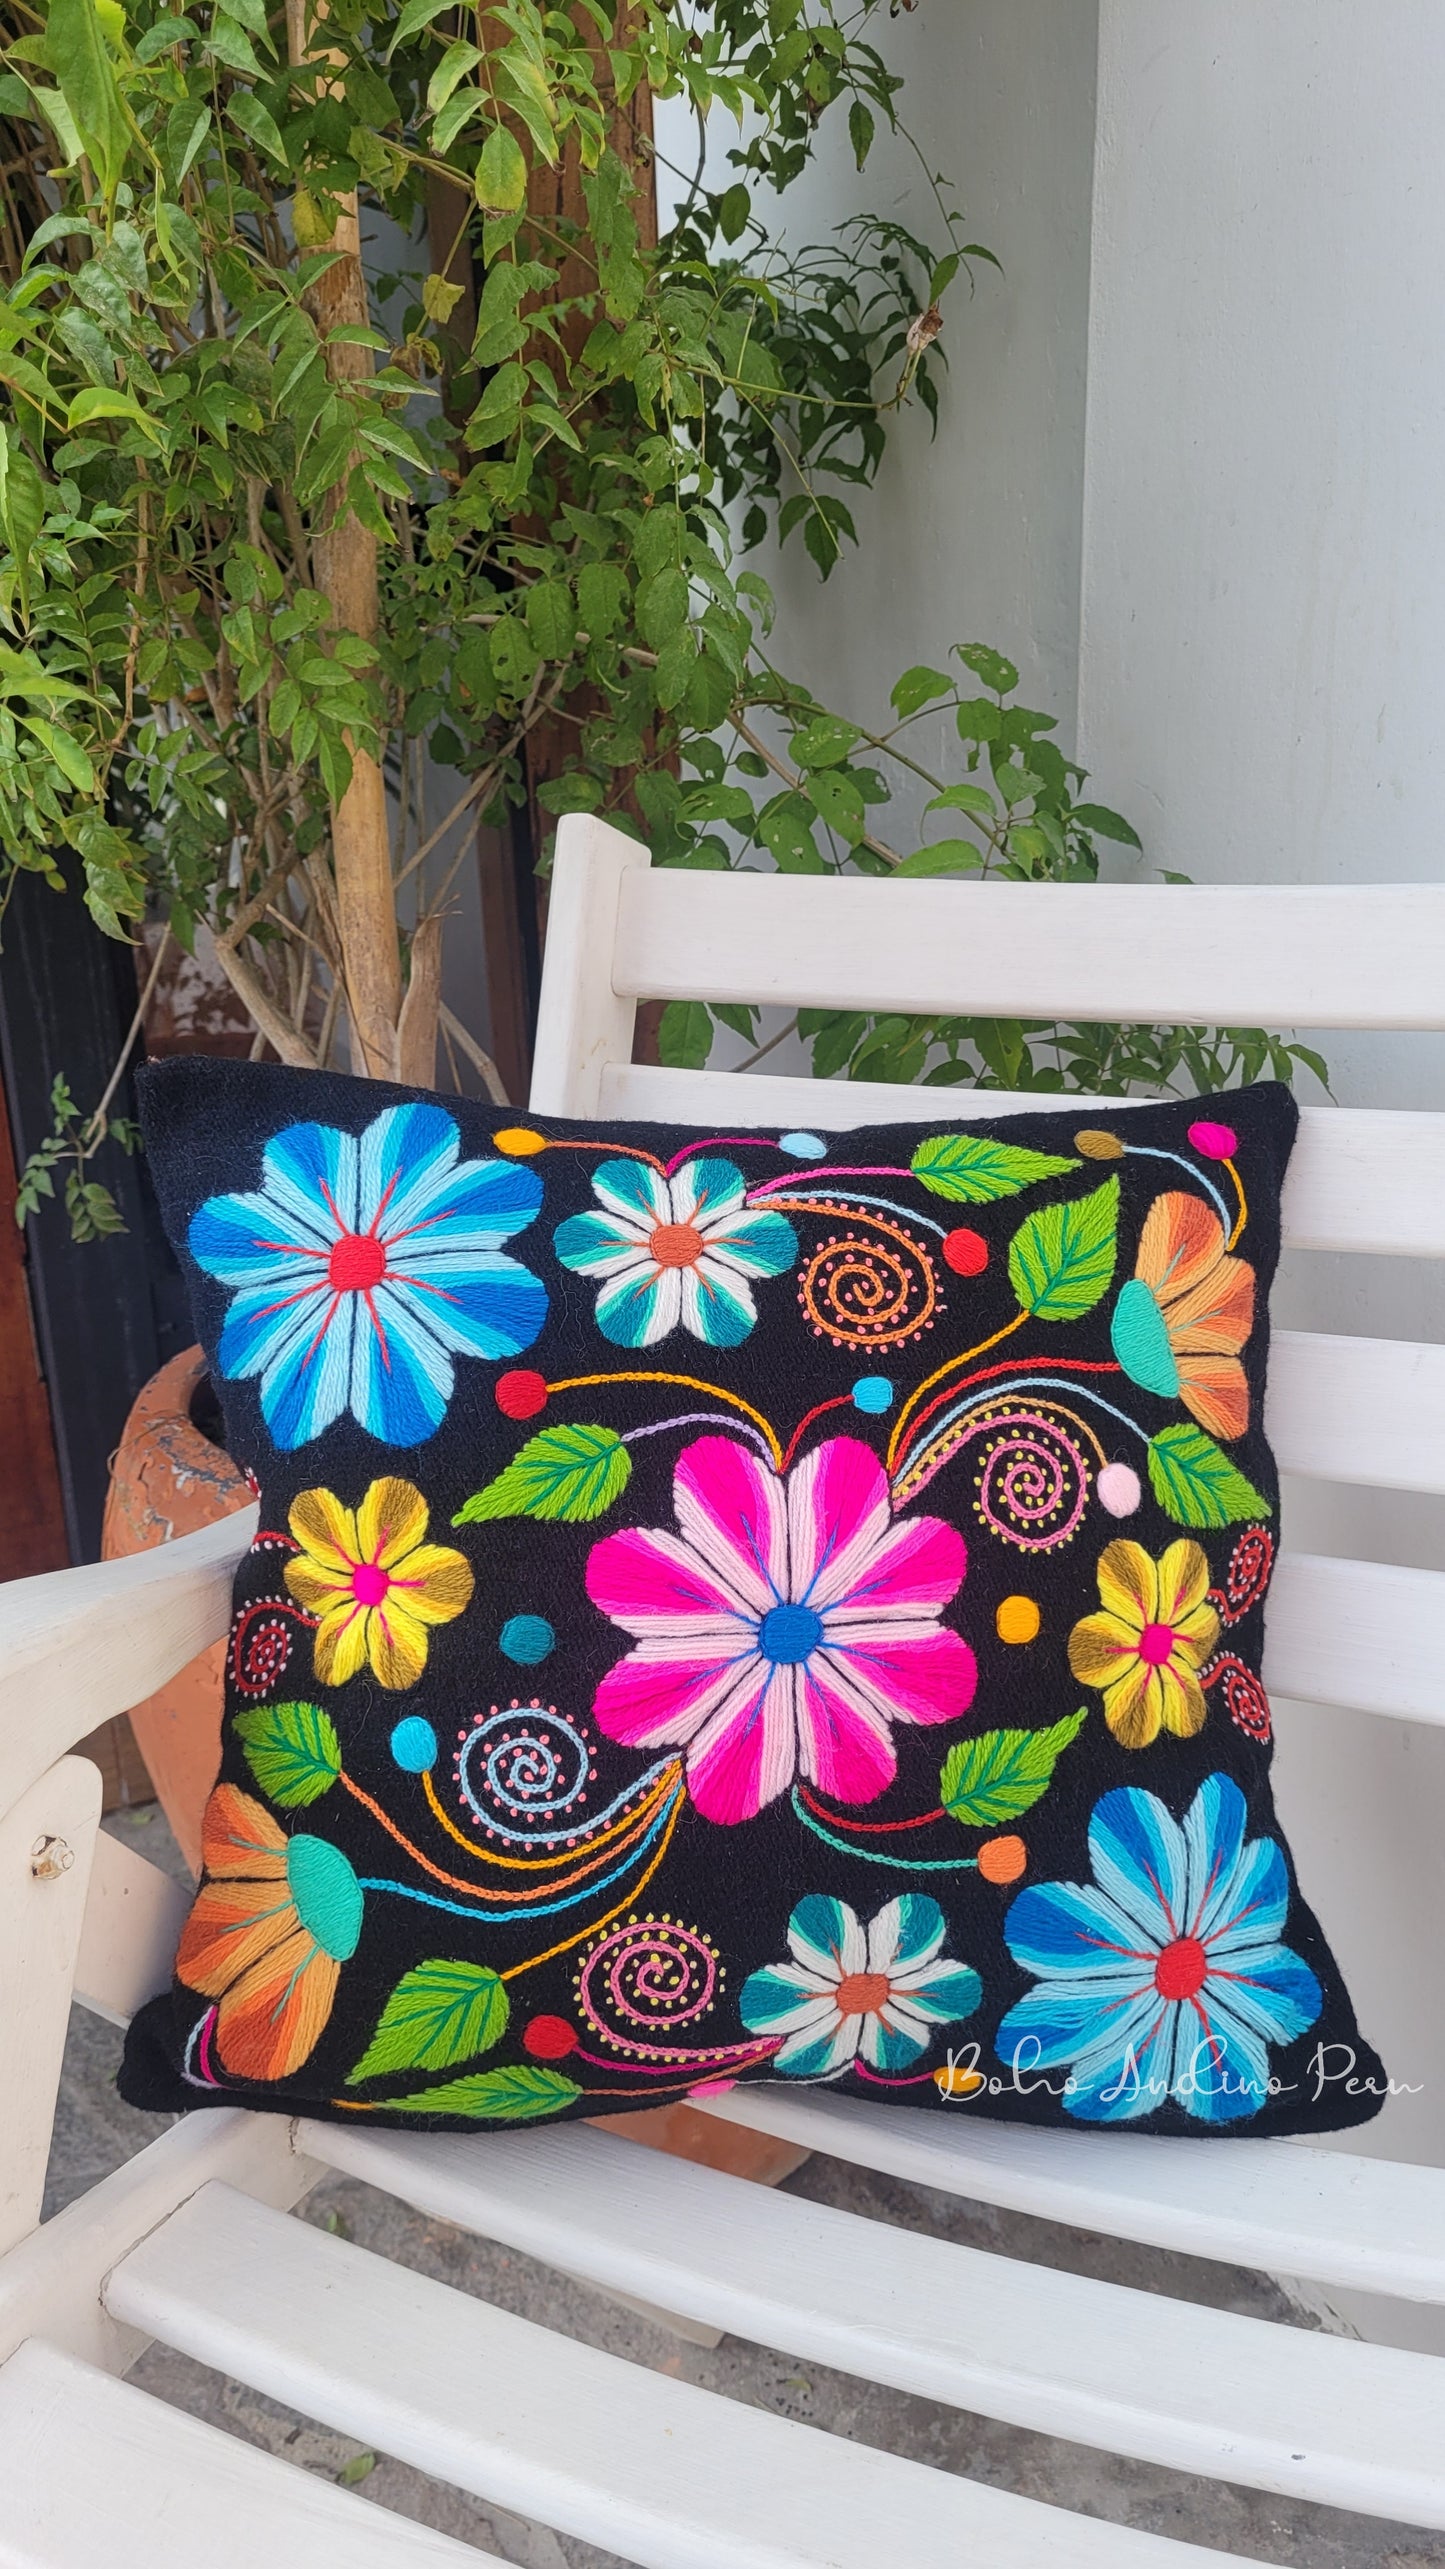 EMBROIDERED CUSHION COVERS